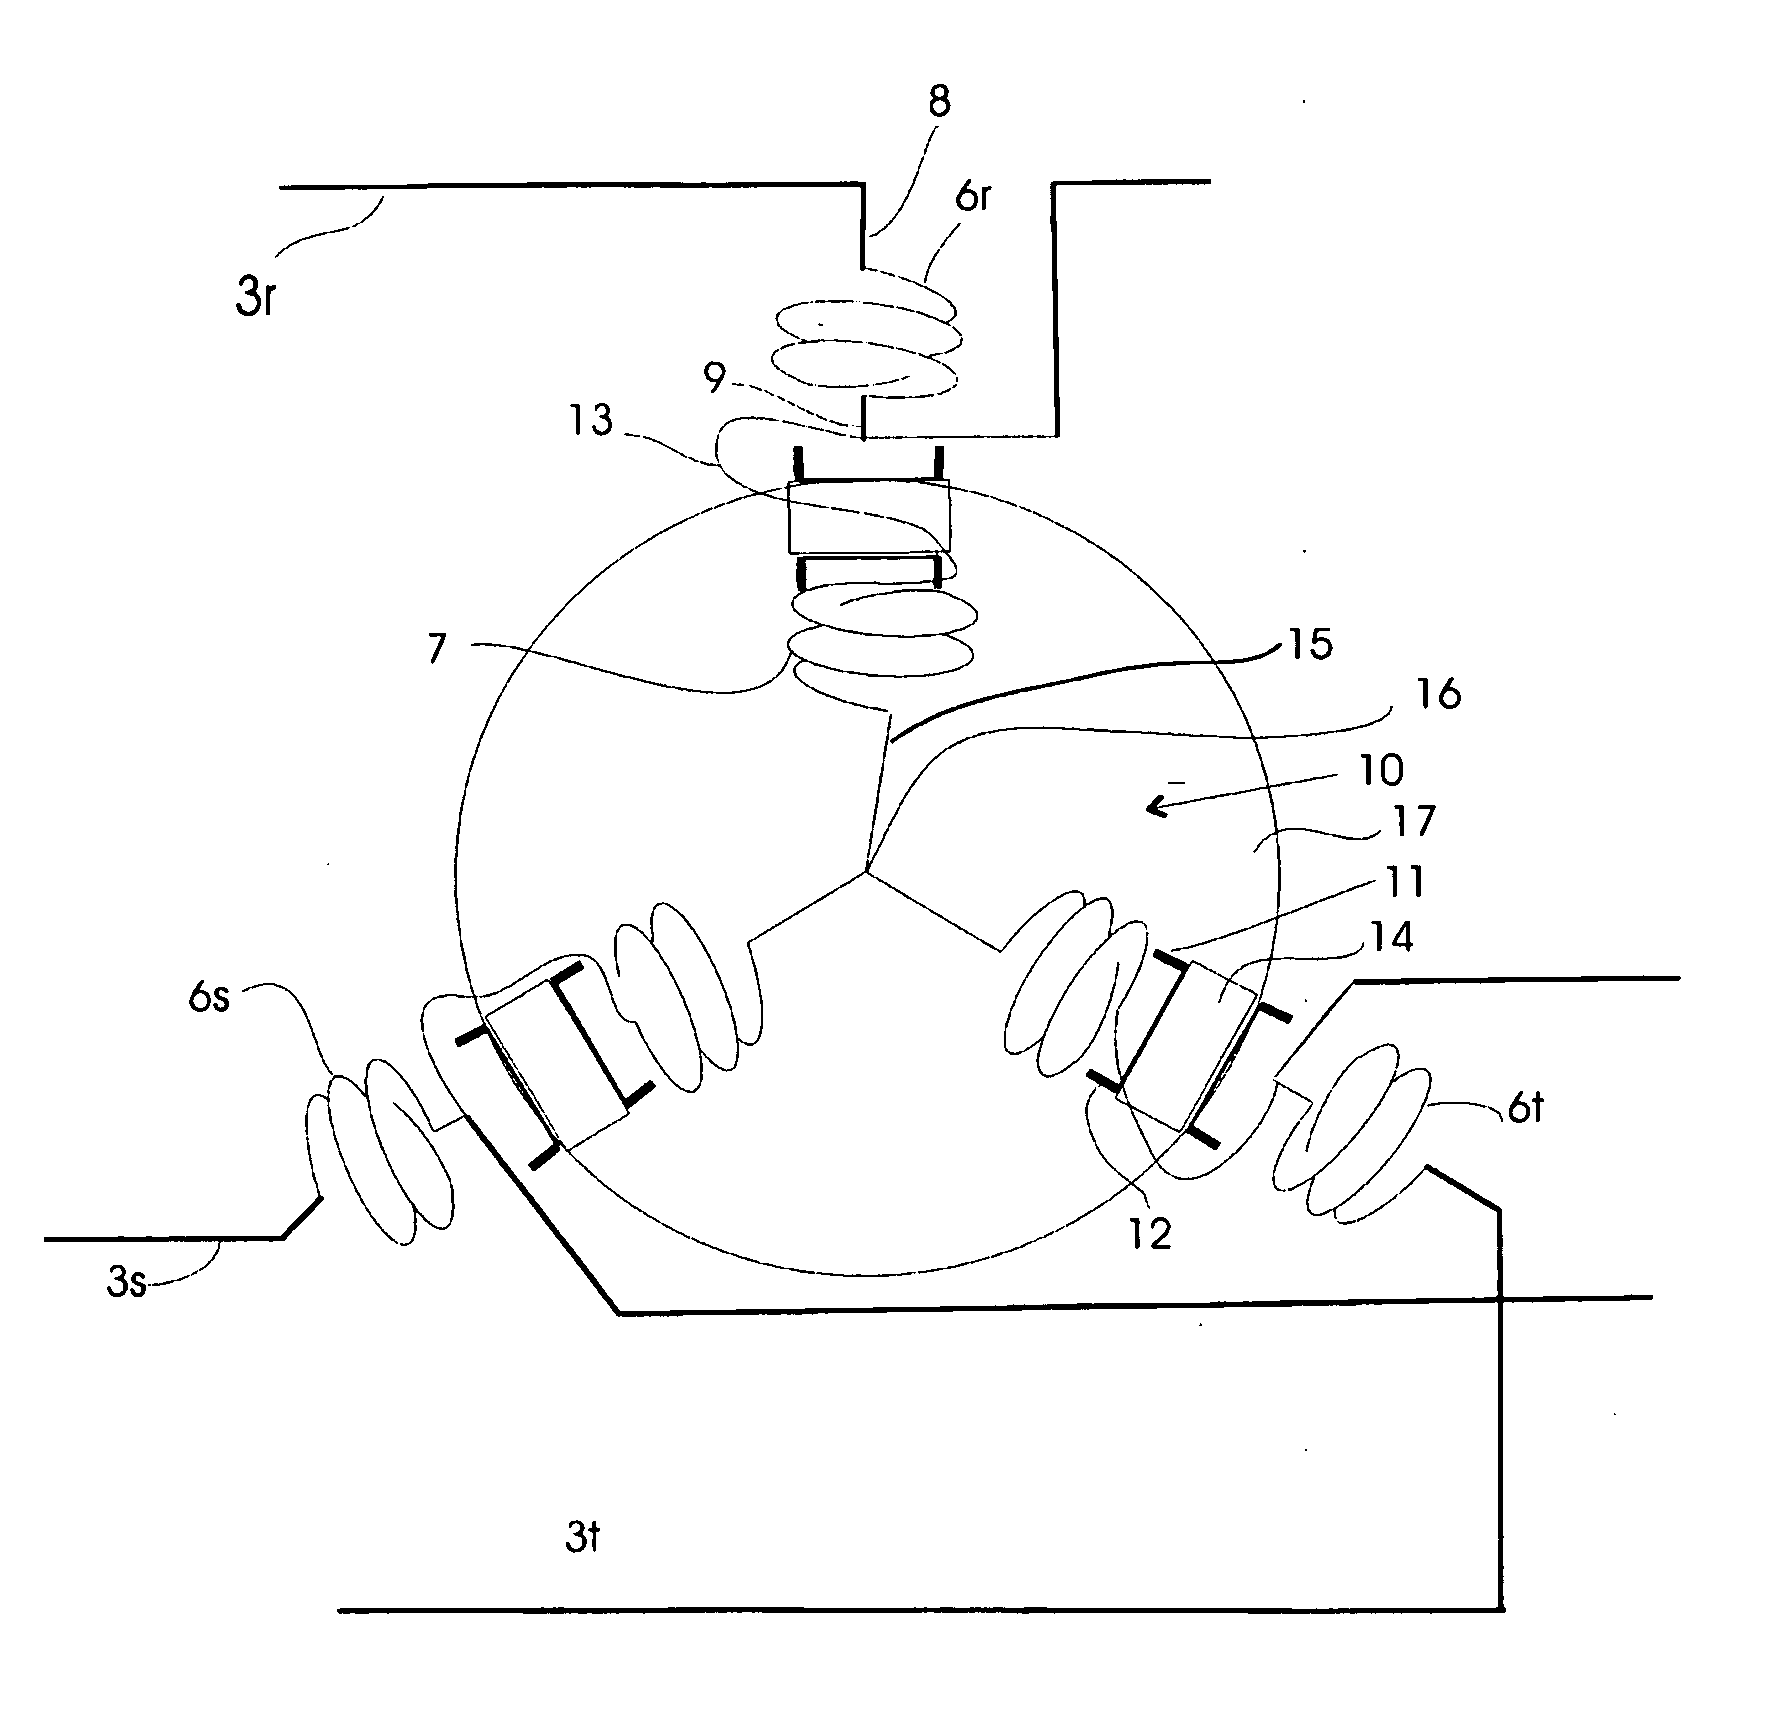 Induction Regulator for Power Flow Control in an AC Transmission Network